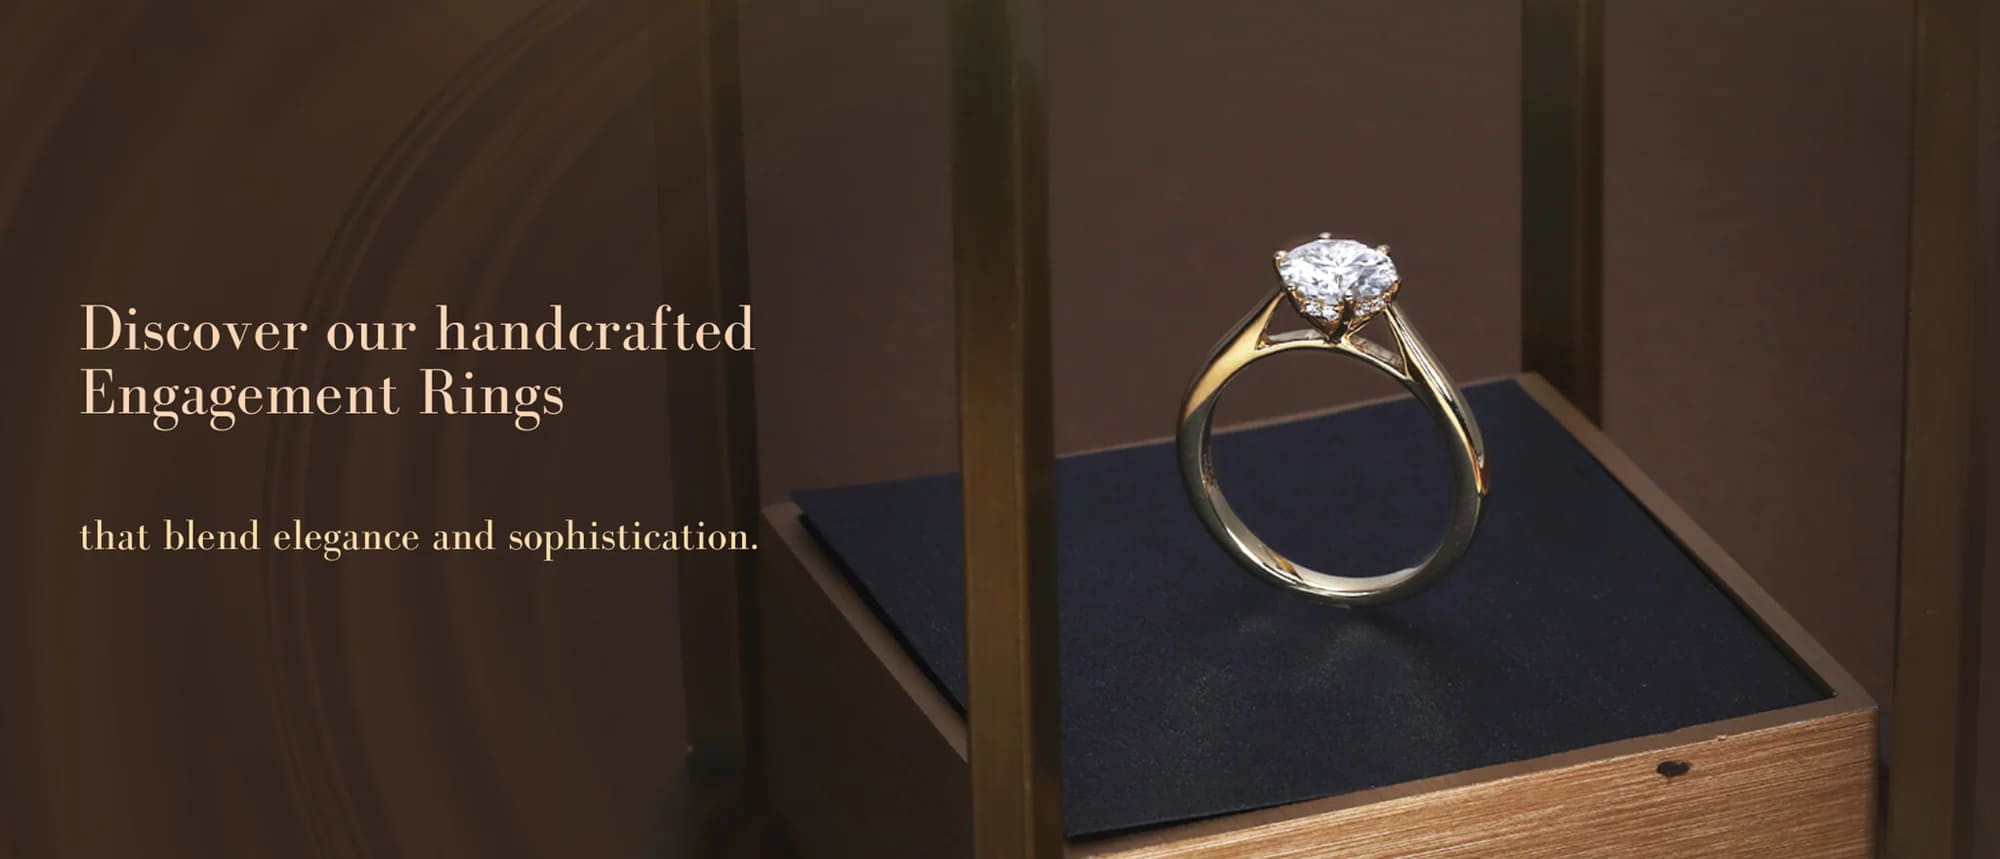 Discover our handcrafted Engagement Rings